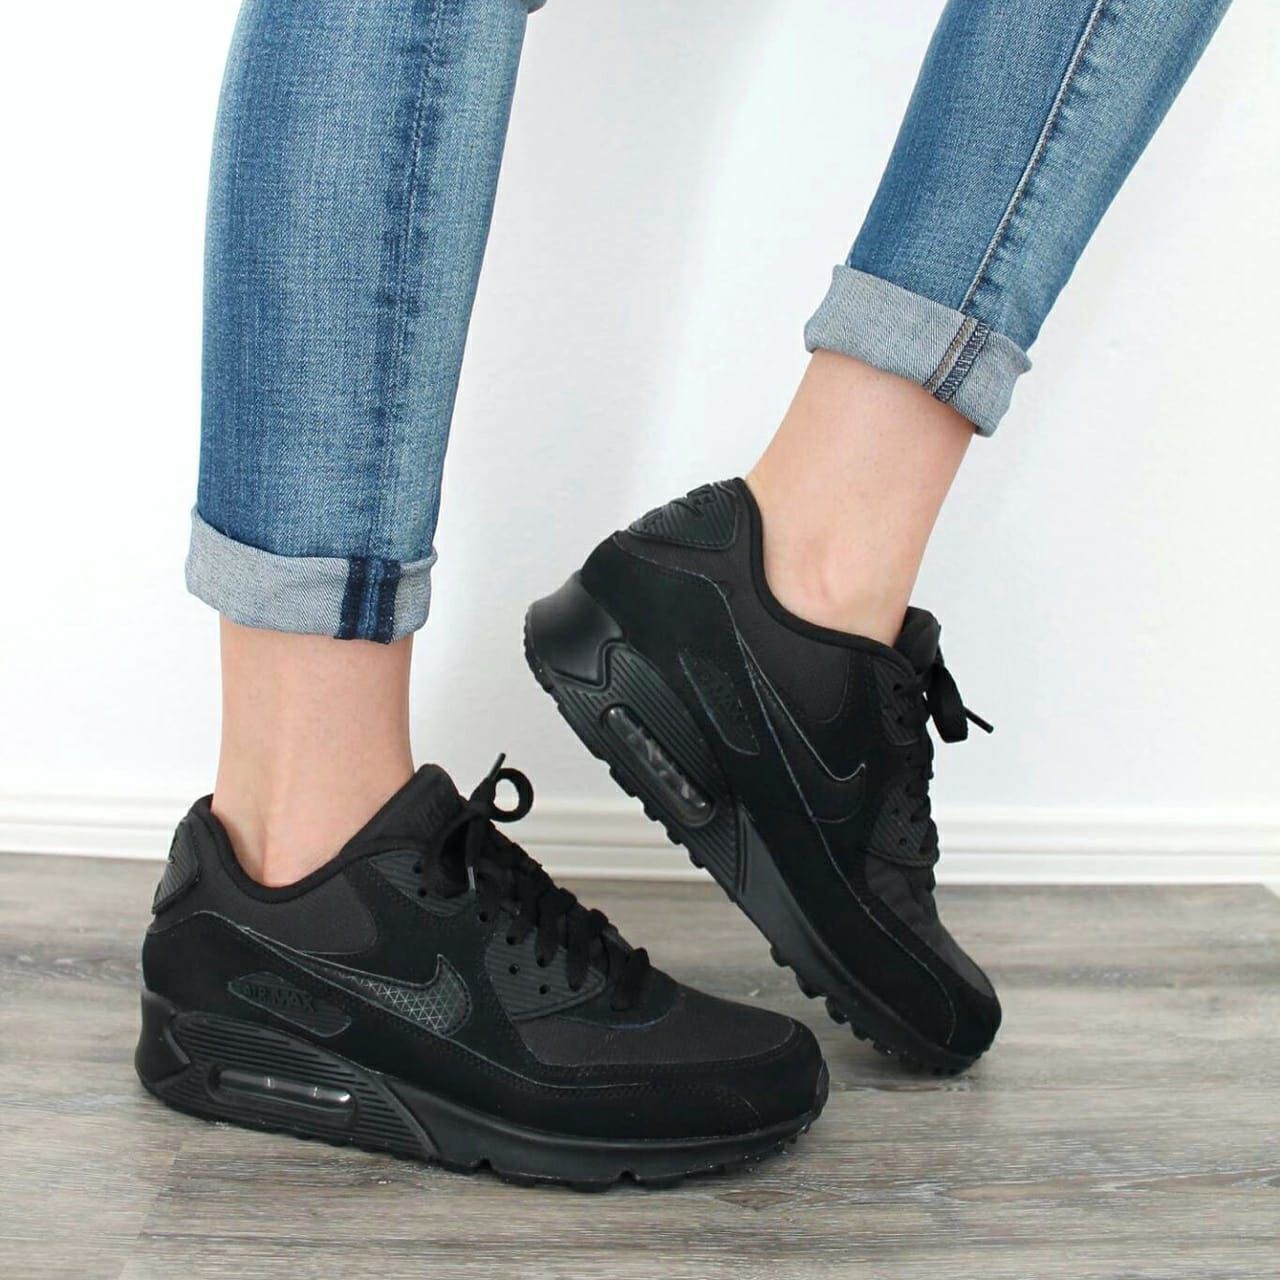 Buy first quality replica running shoes | nike air max 90 | Yasstore